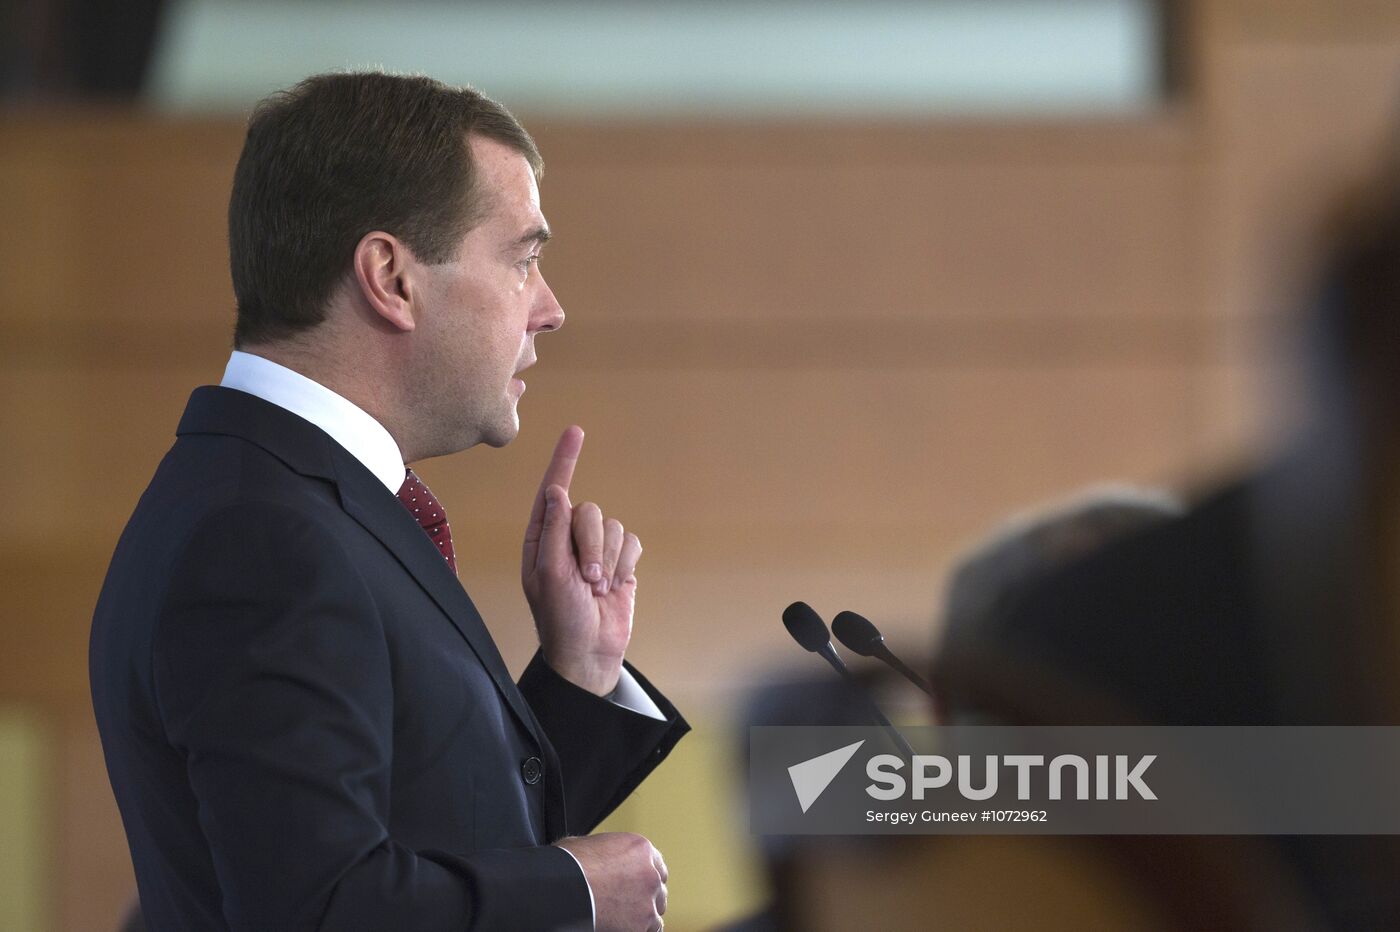 Dmitry Medvedev attends conference on European security